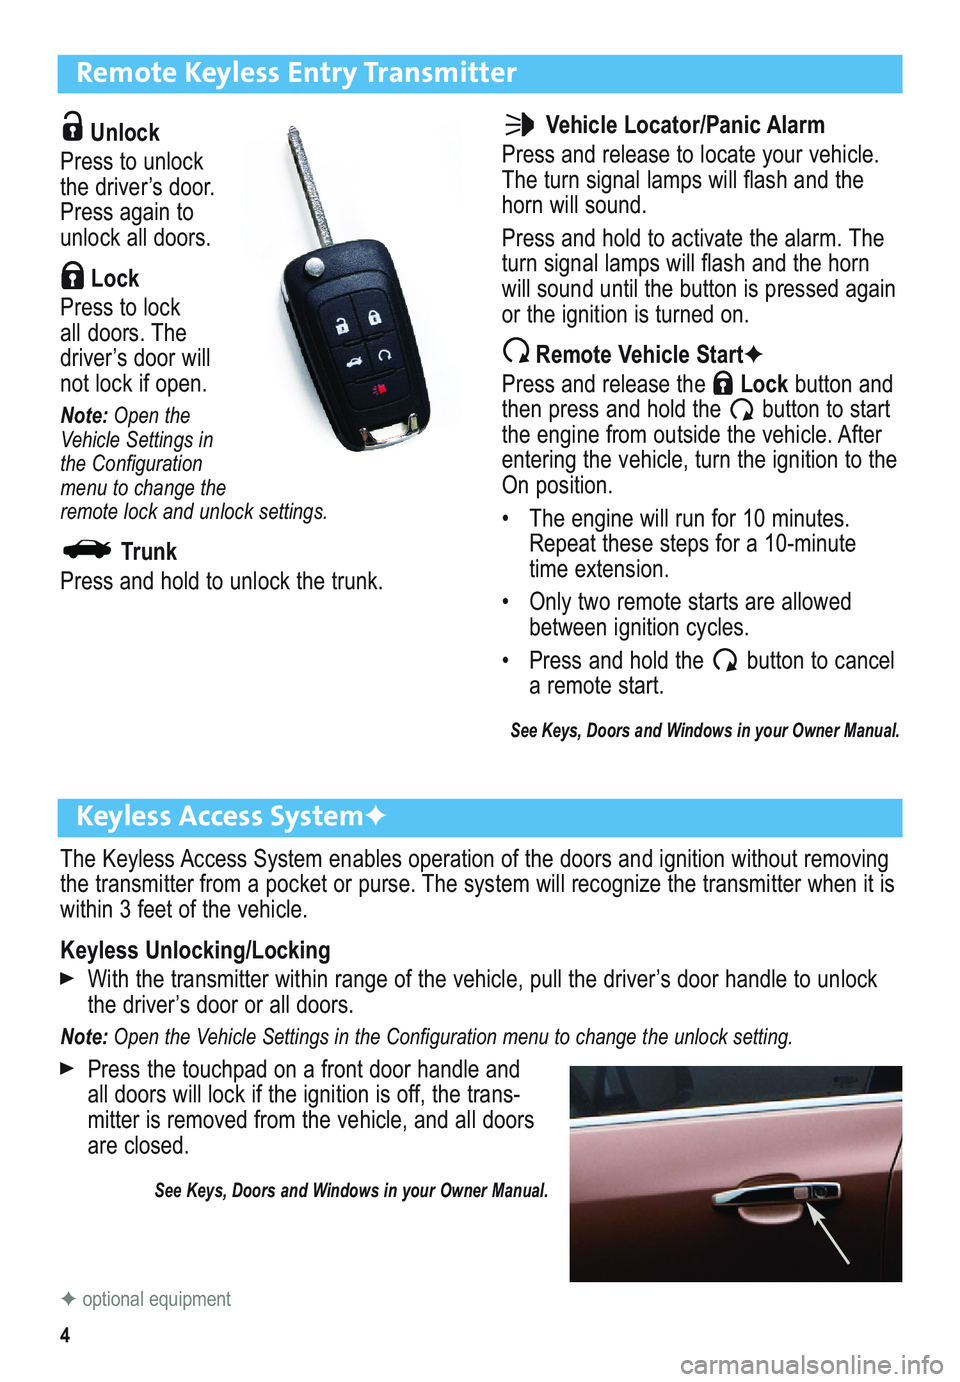 BUICK ENCLAVE 2011  Get To Know Guide 4
Remote Keyless Entry Transmitter
Unlock 
Press to unlock
the  driver’s door.
Press again to
unlock all doors.
Lock 
Press to lock 
all doors. The 
driver’s door will
not lock if open. 
Note:Open